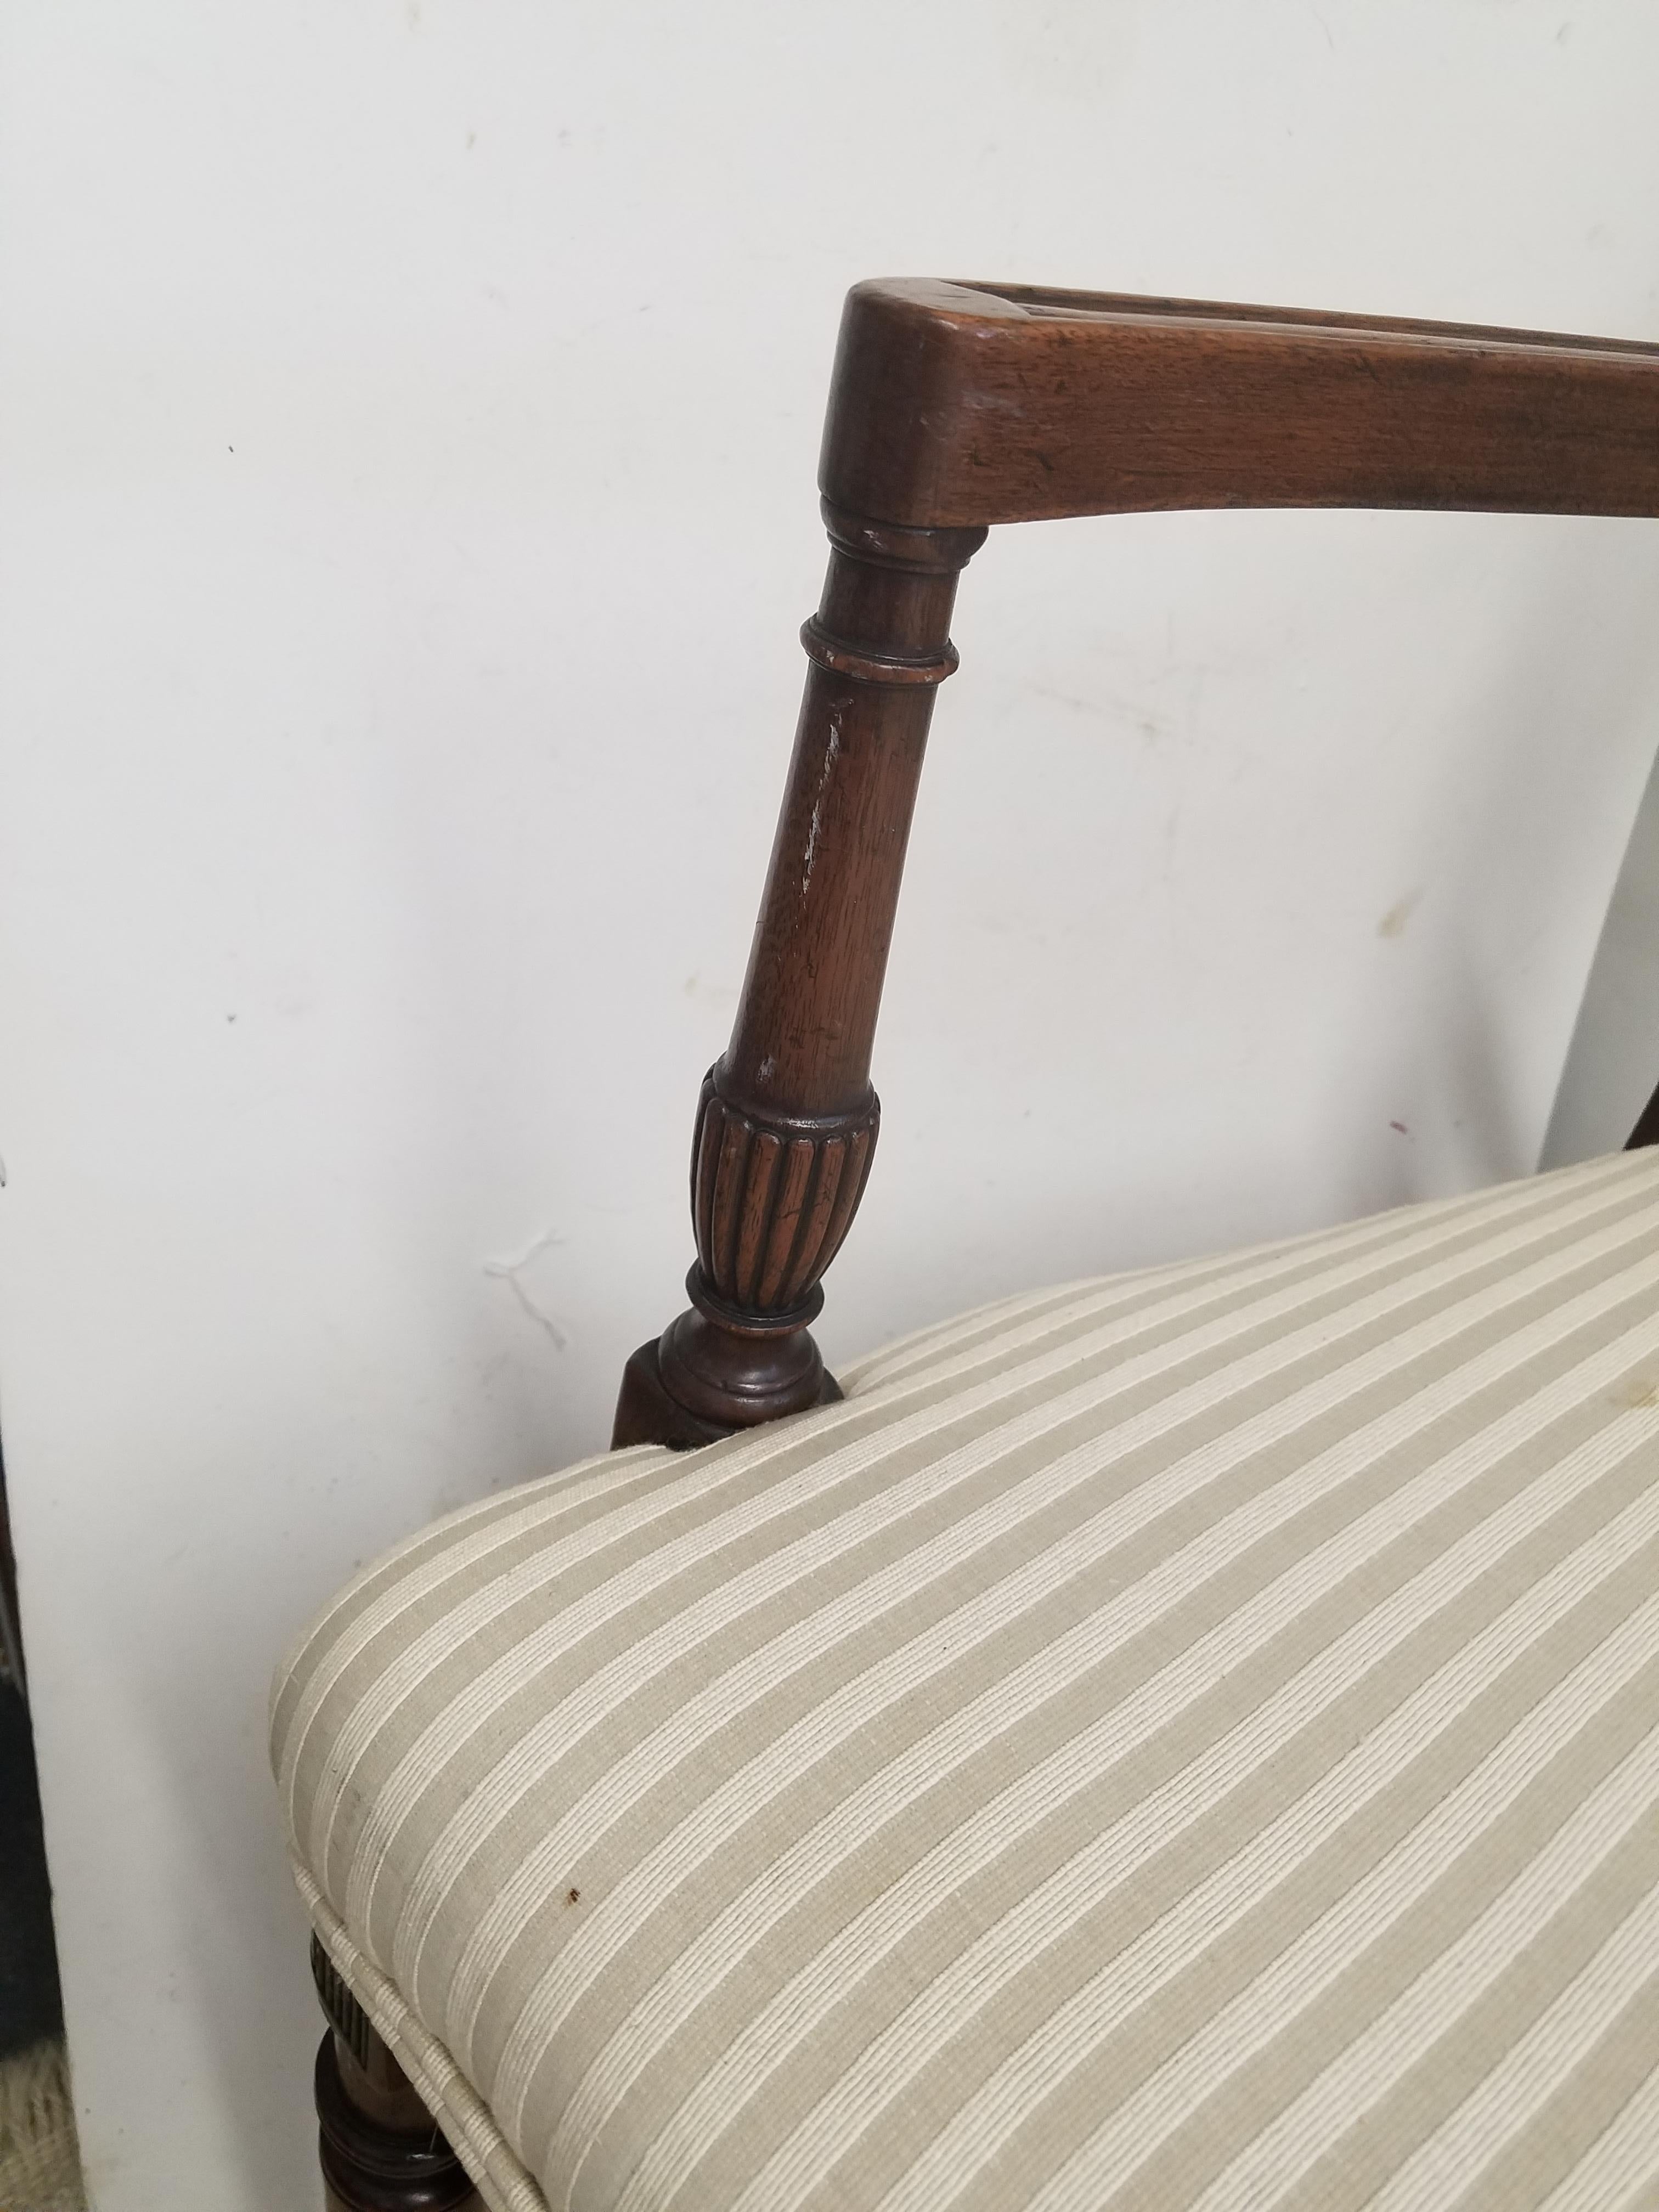 Measures: 55.5 W x 23.5 D x 34 H seat height 18
Wonderful quality mid 20th century Regency Style settee upholstered in an ivory stripe fabric. The back with a triple chair form with elegant details. 
Excellent condition 

